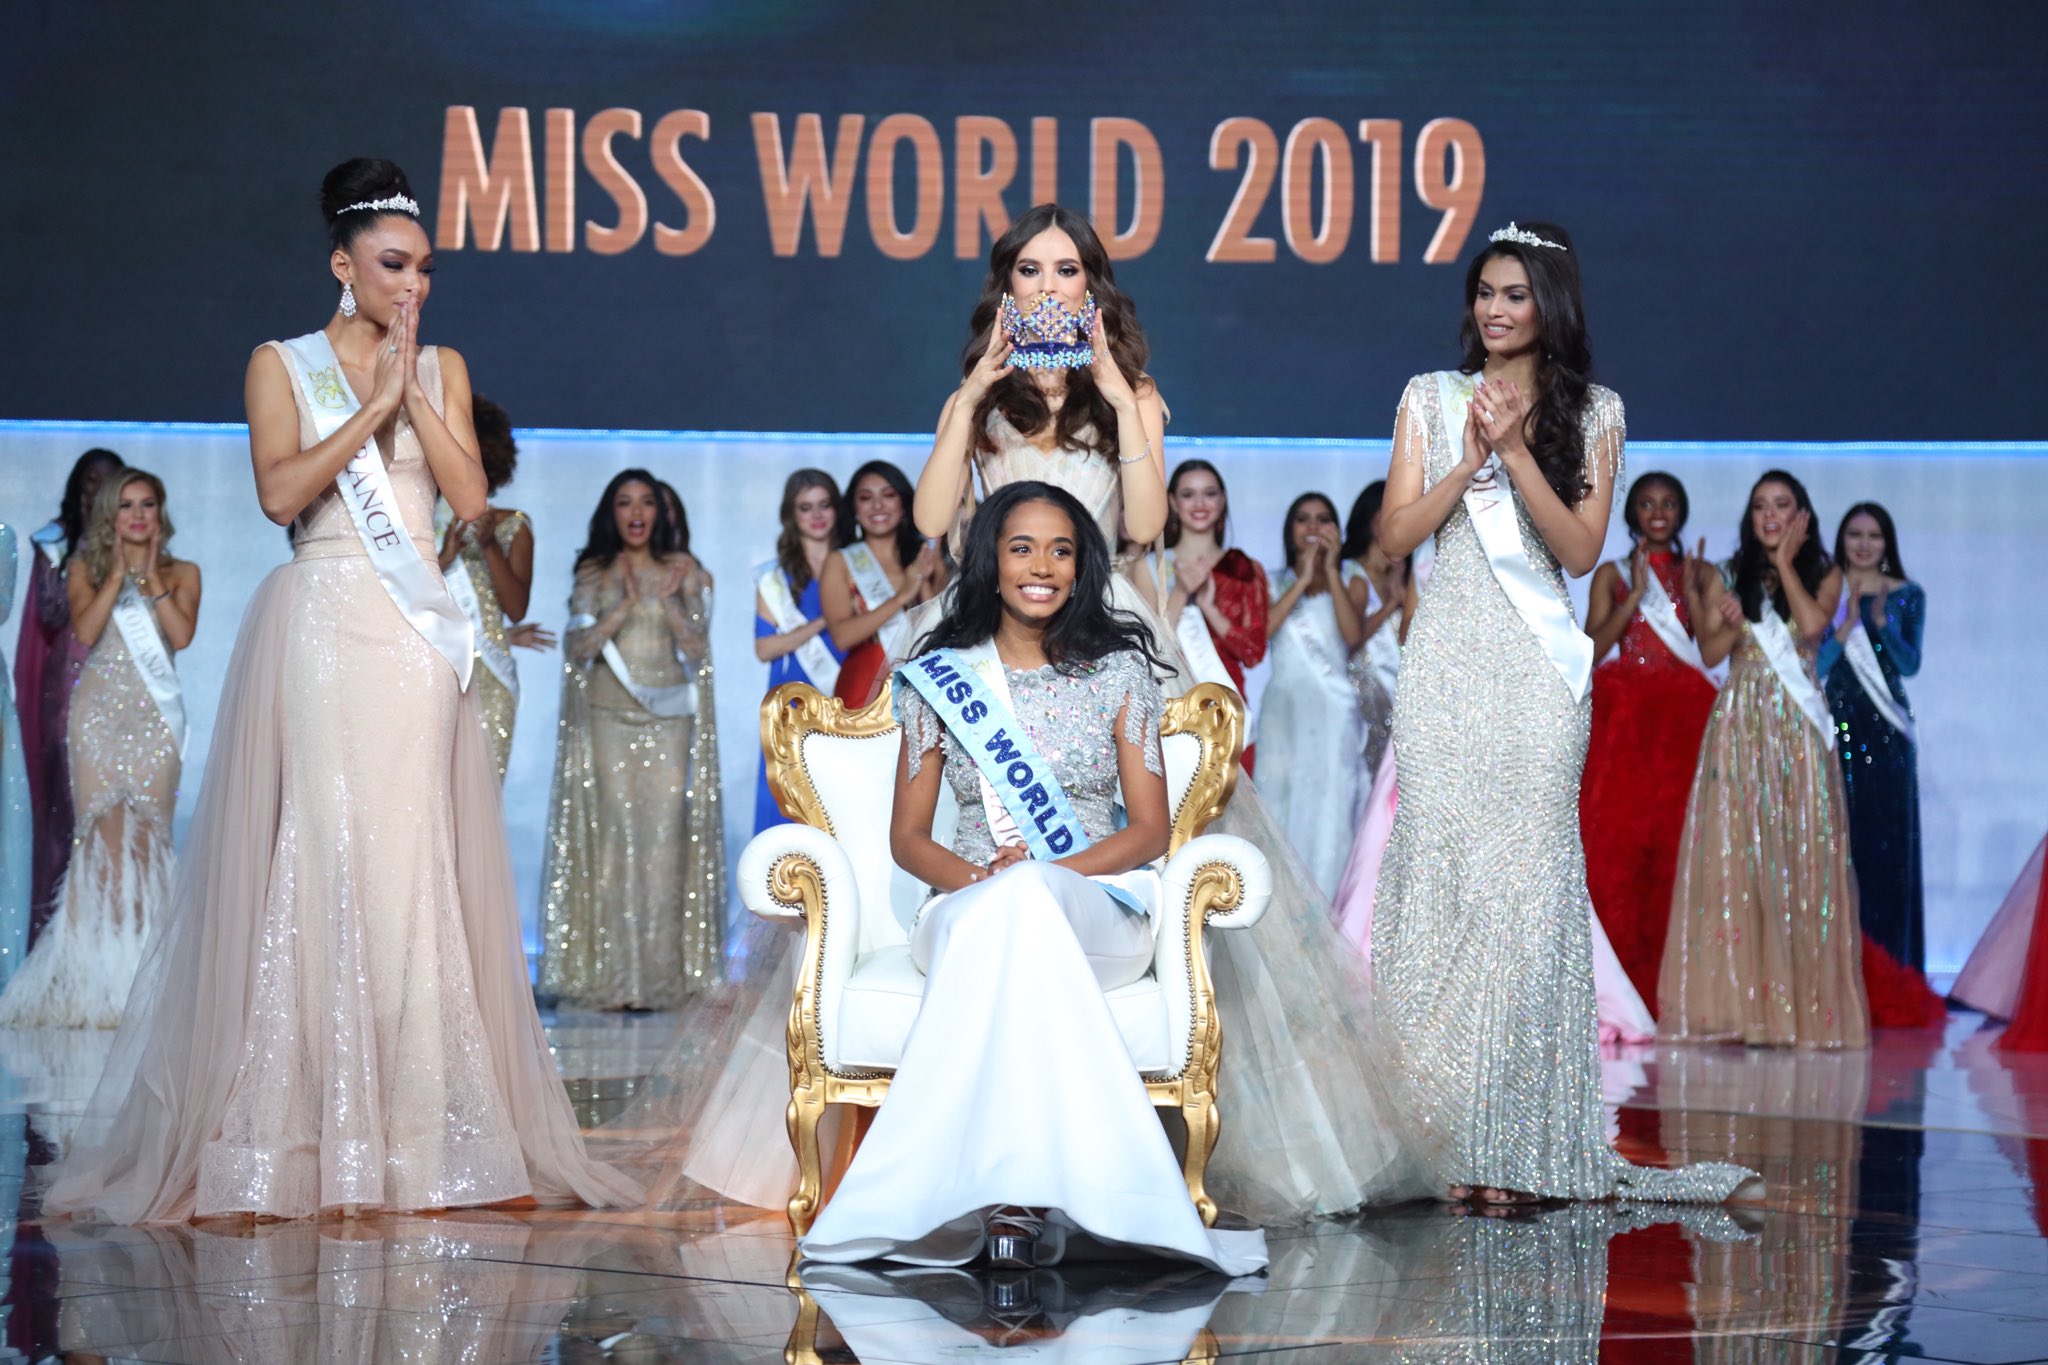 Jamaica’s Toni-Ann Singh was crowned as Miss World 2019 on Saturday